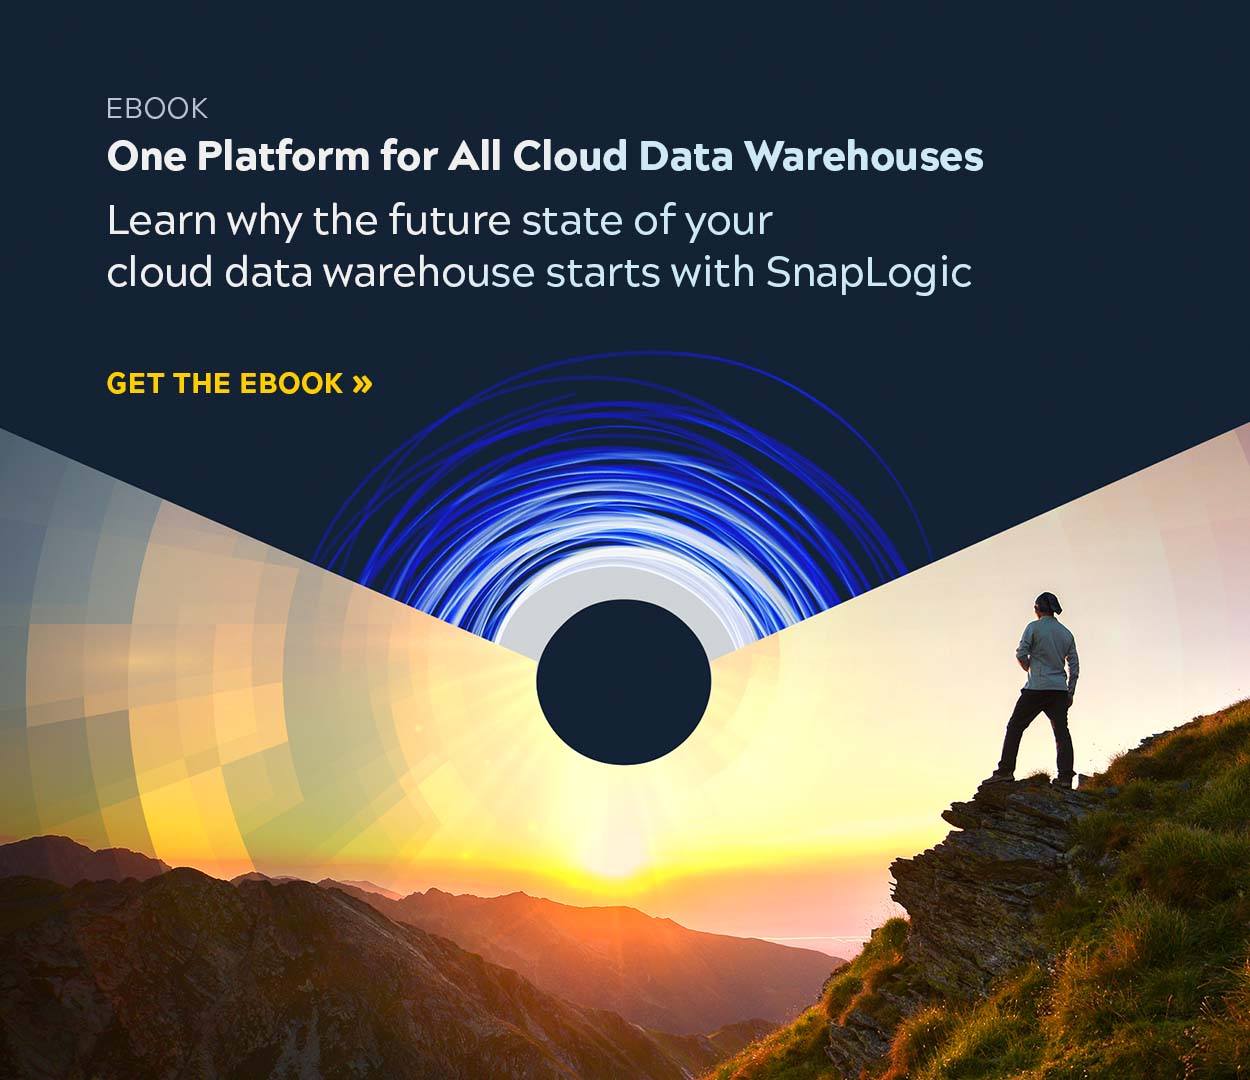 The Future State of the Cloud Data Warehouse